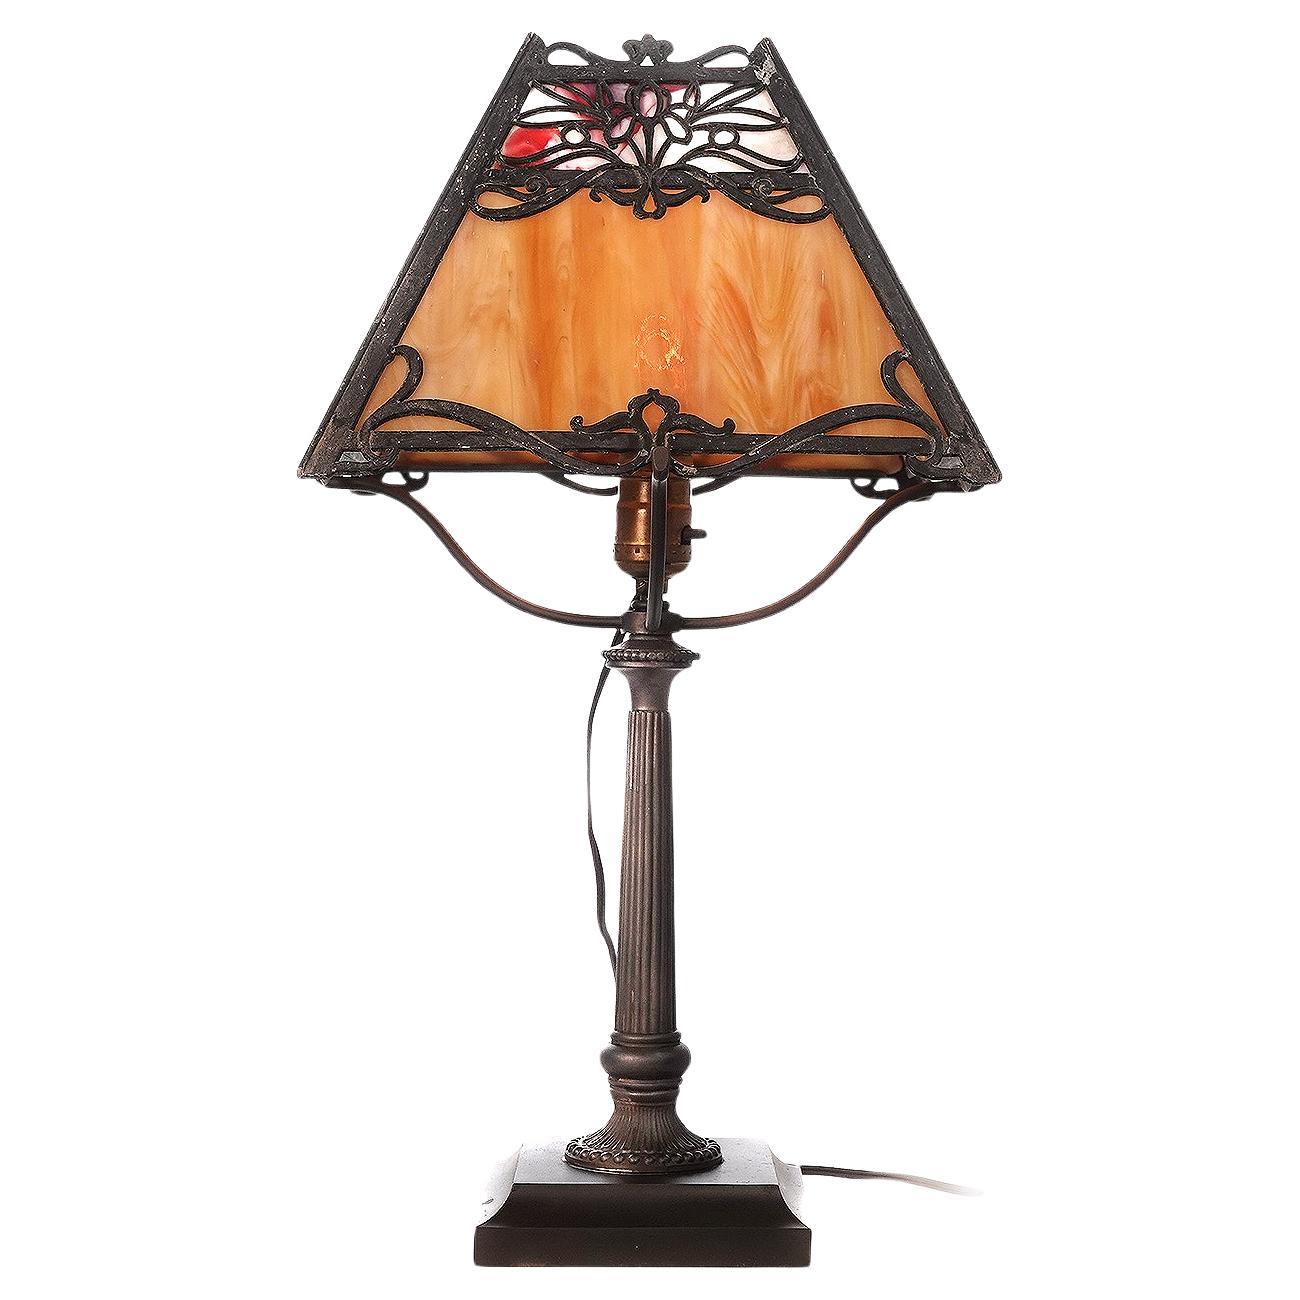 Stained Glass with Filigree Overlay Arts and Crafts Table lamp